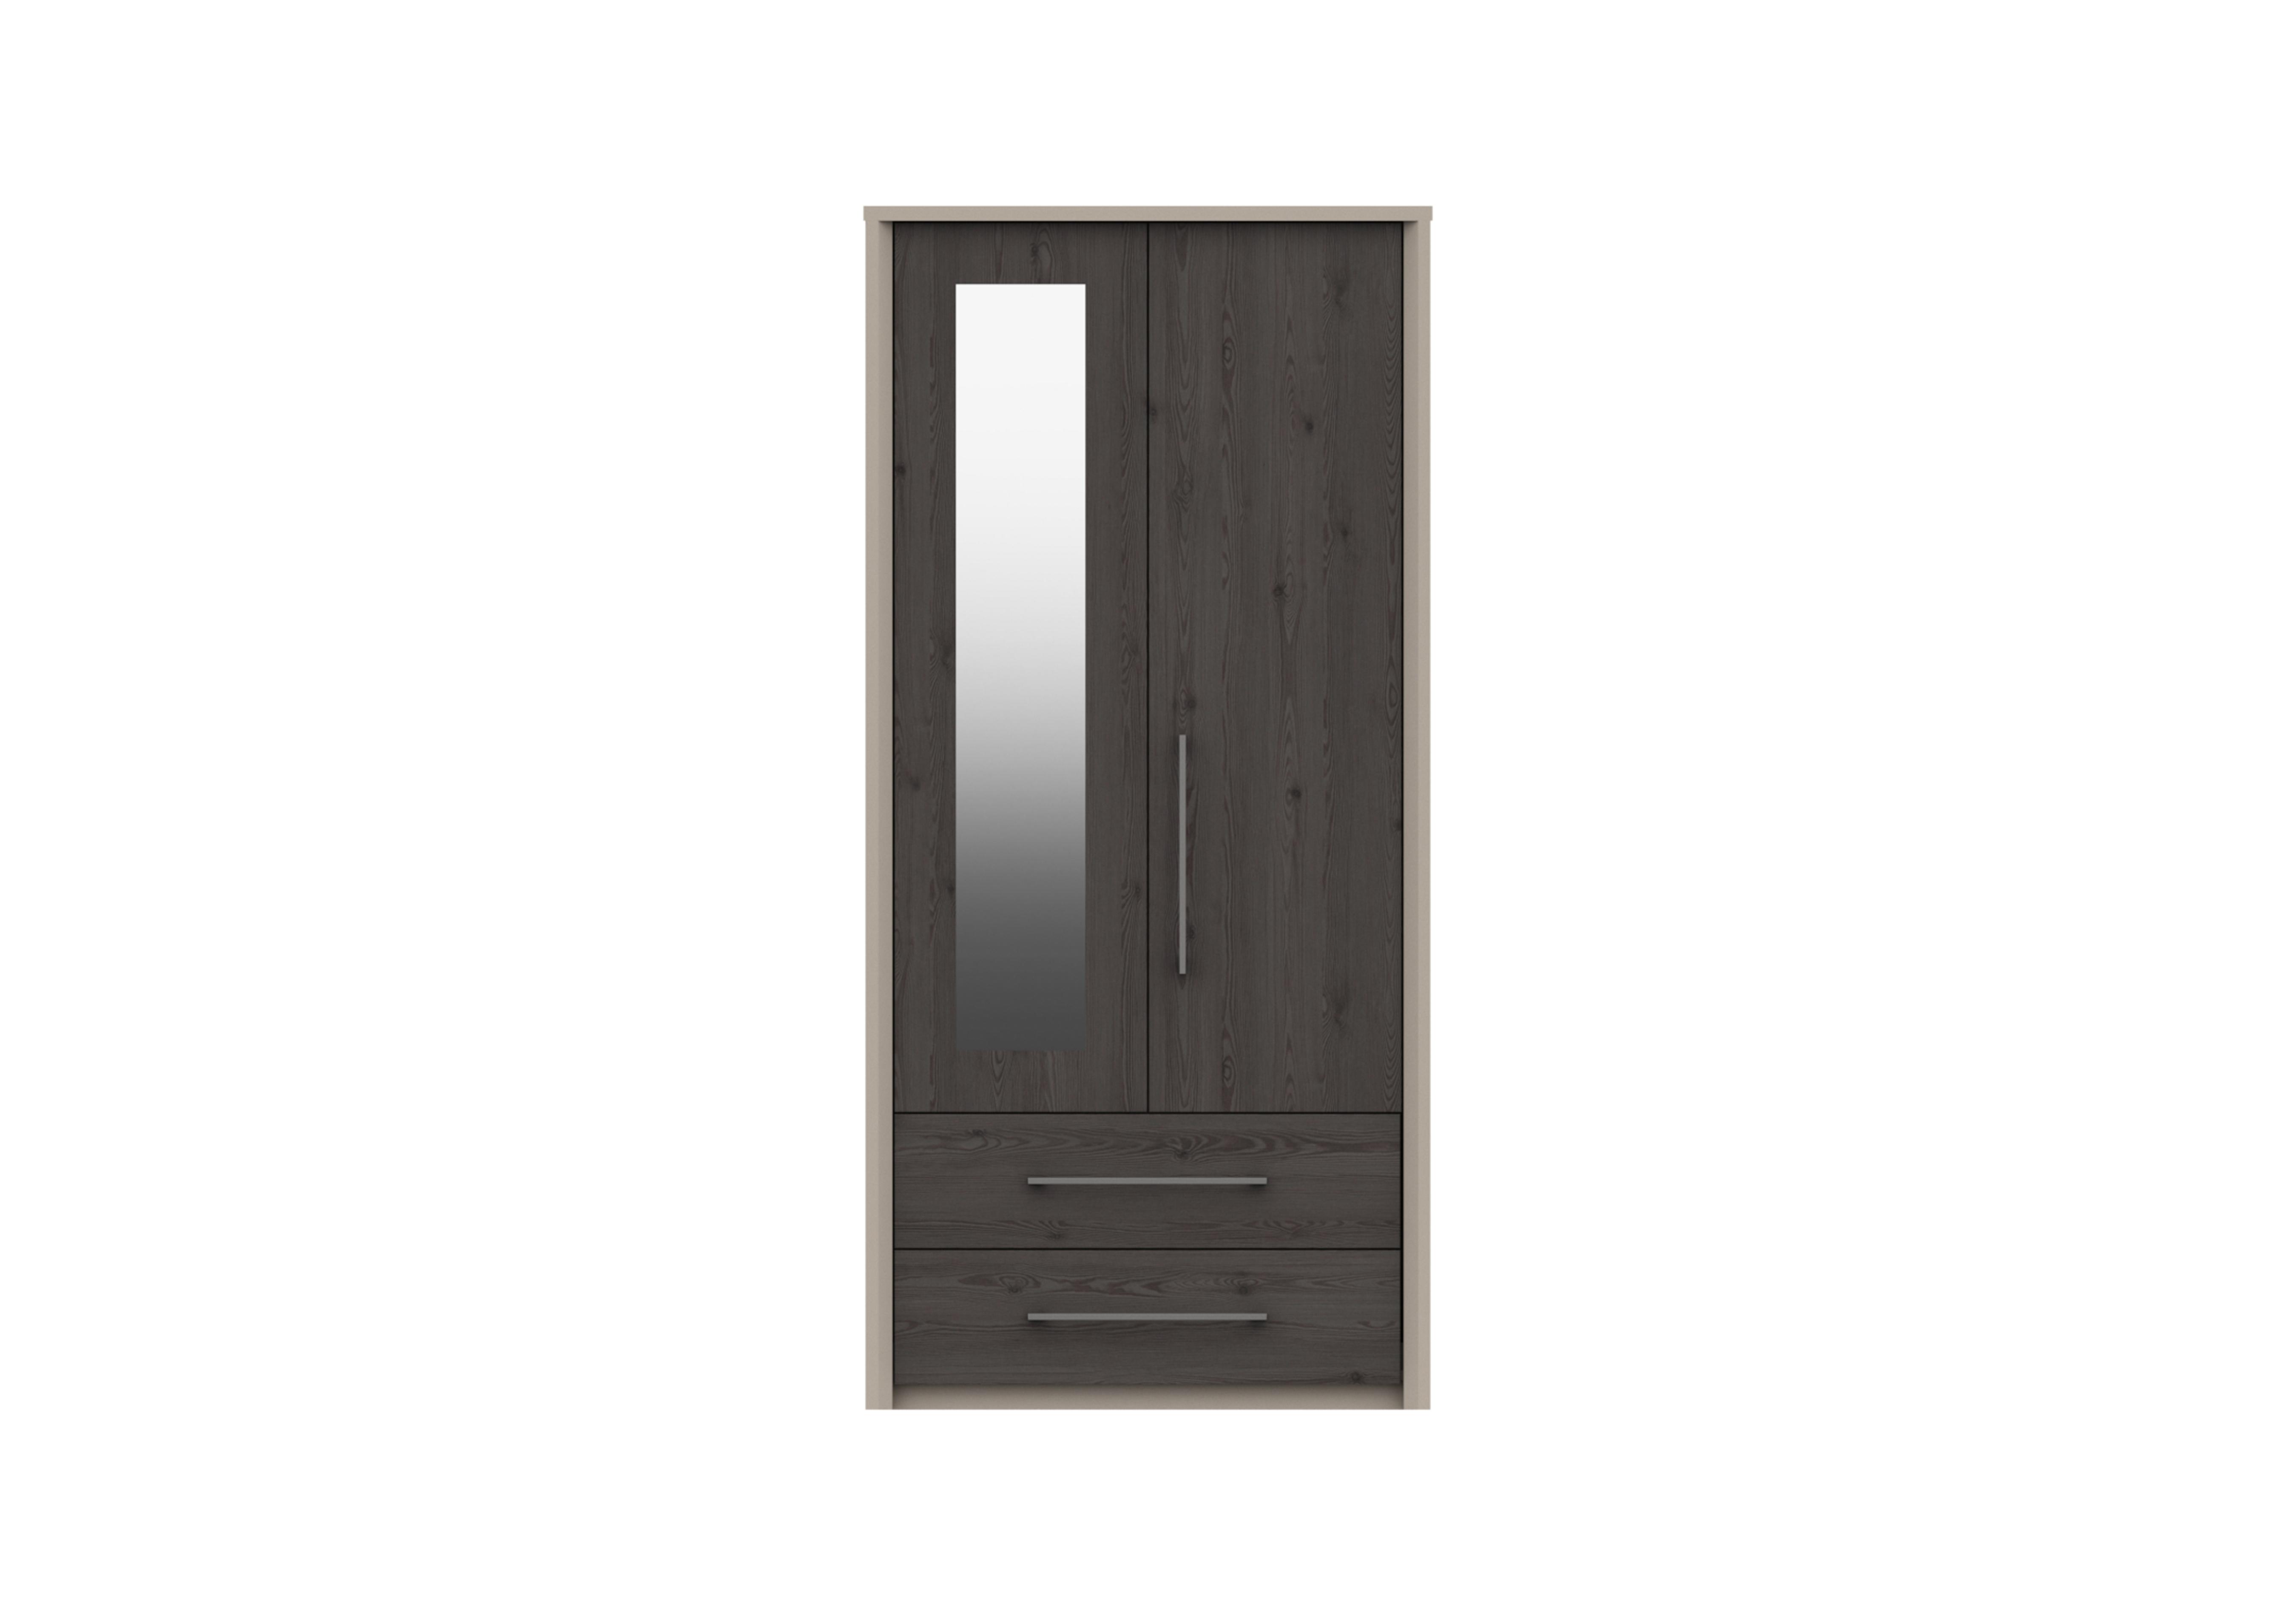 Paddington 2 Door 2 Drawer Wardrobe with Mirror in Fired Earth/Anthracite Larch on Furniture Village